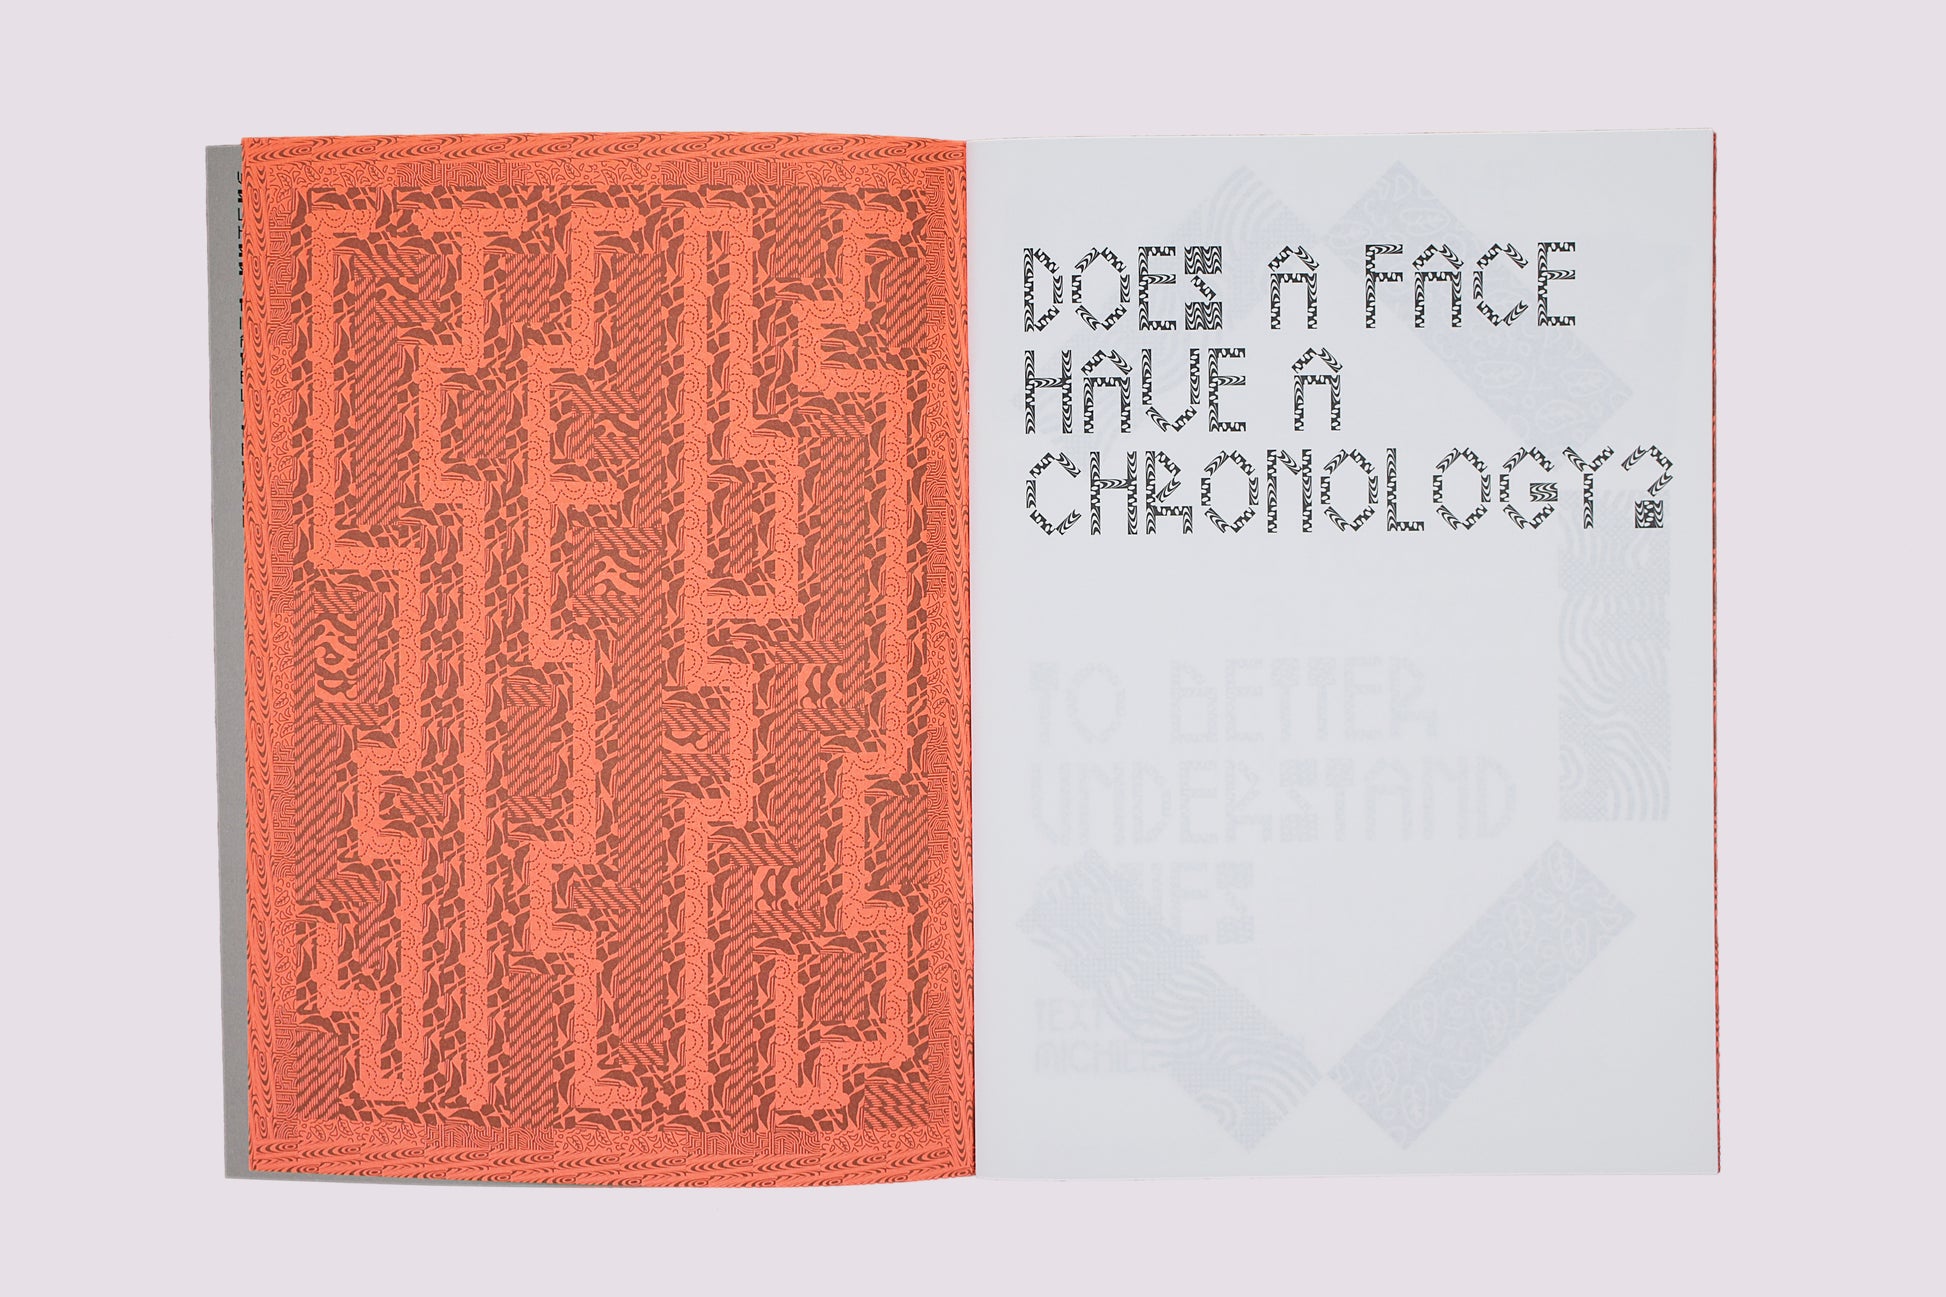 Does A Face Have a Chronology/Team Thursday published by self-publishing